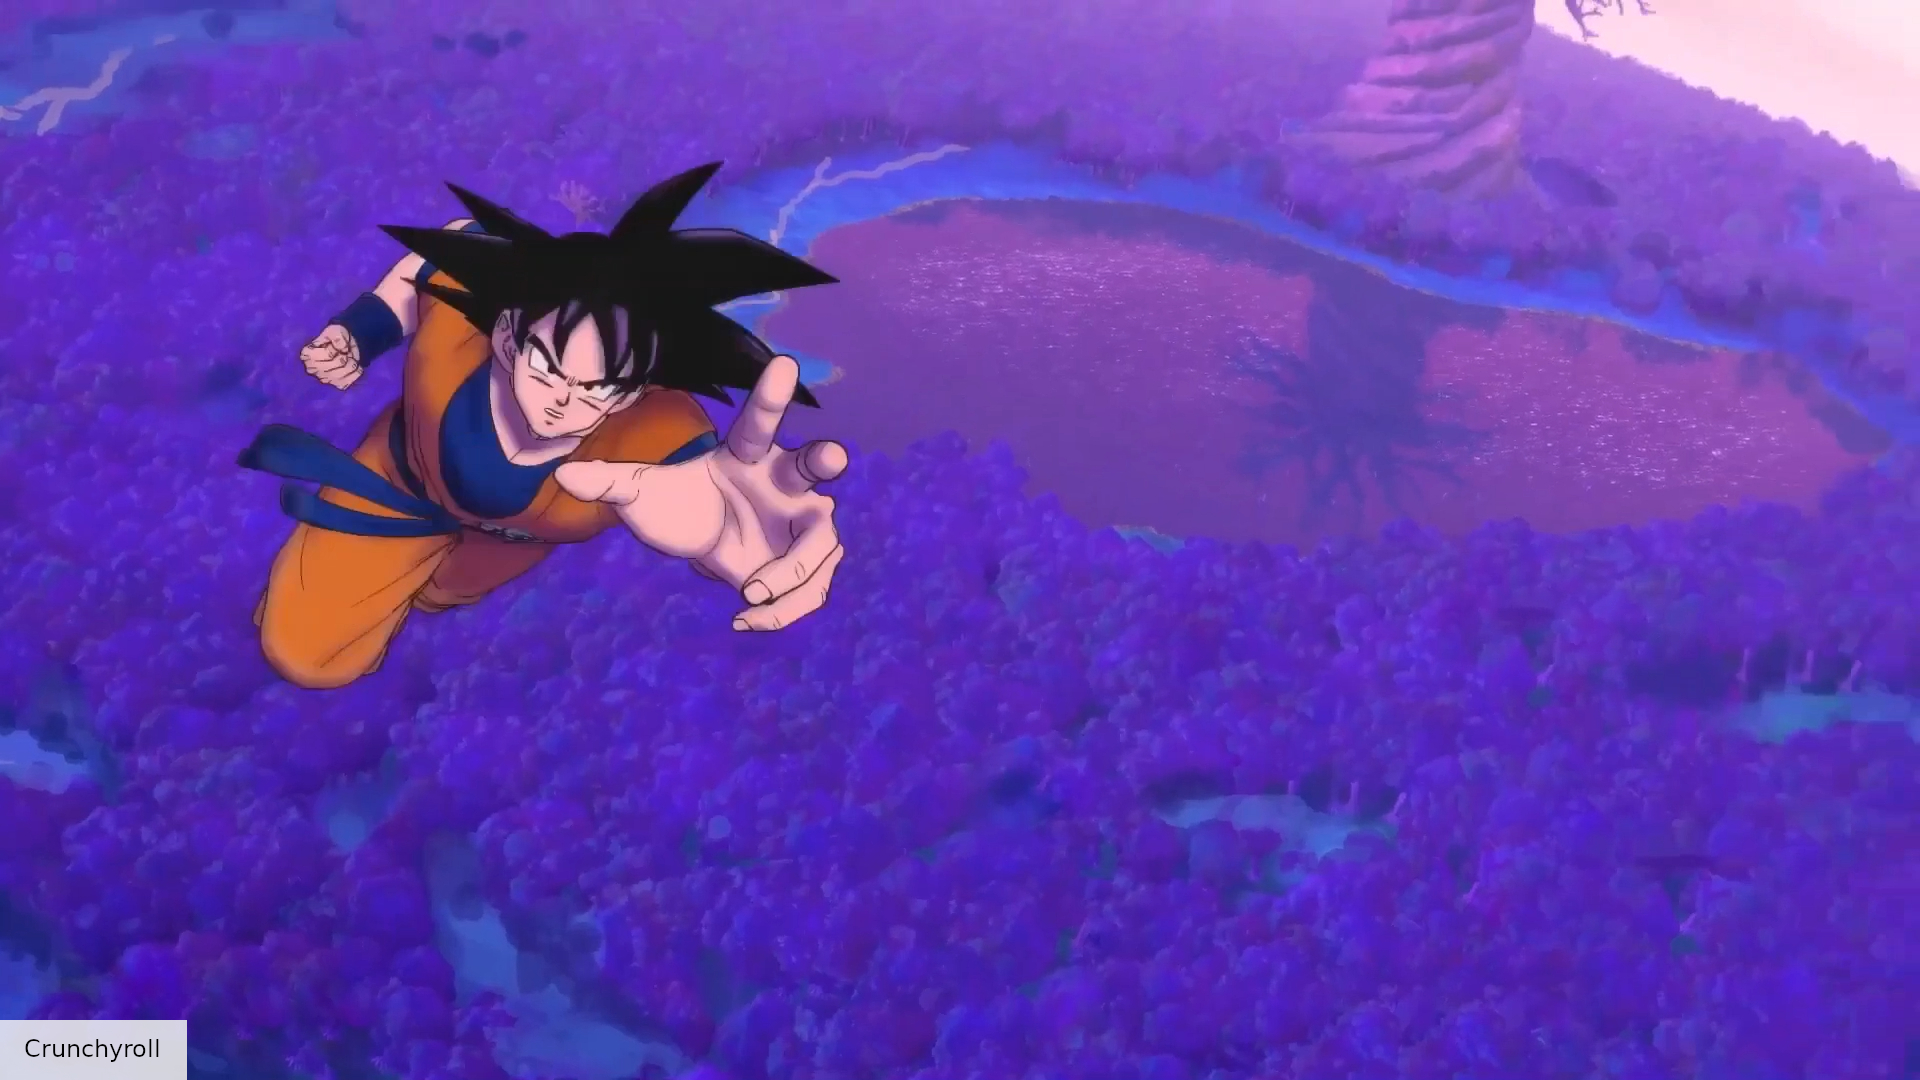 What We're Watching: 'Dragon Ball Super: Super Hero' Opens Atop